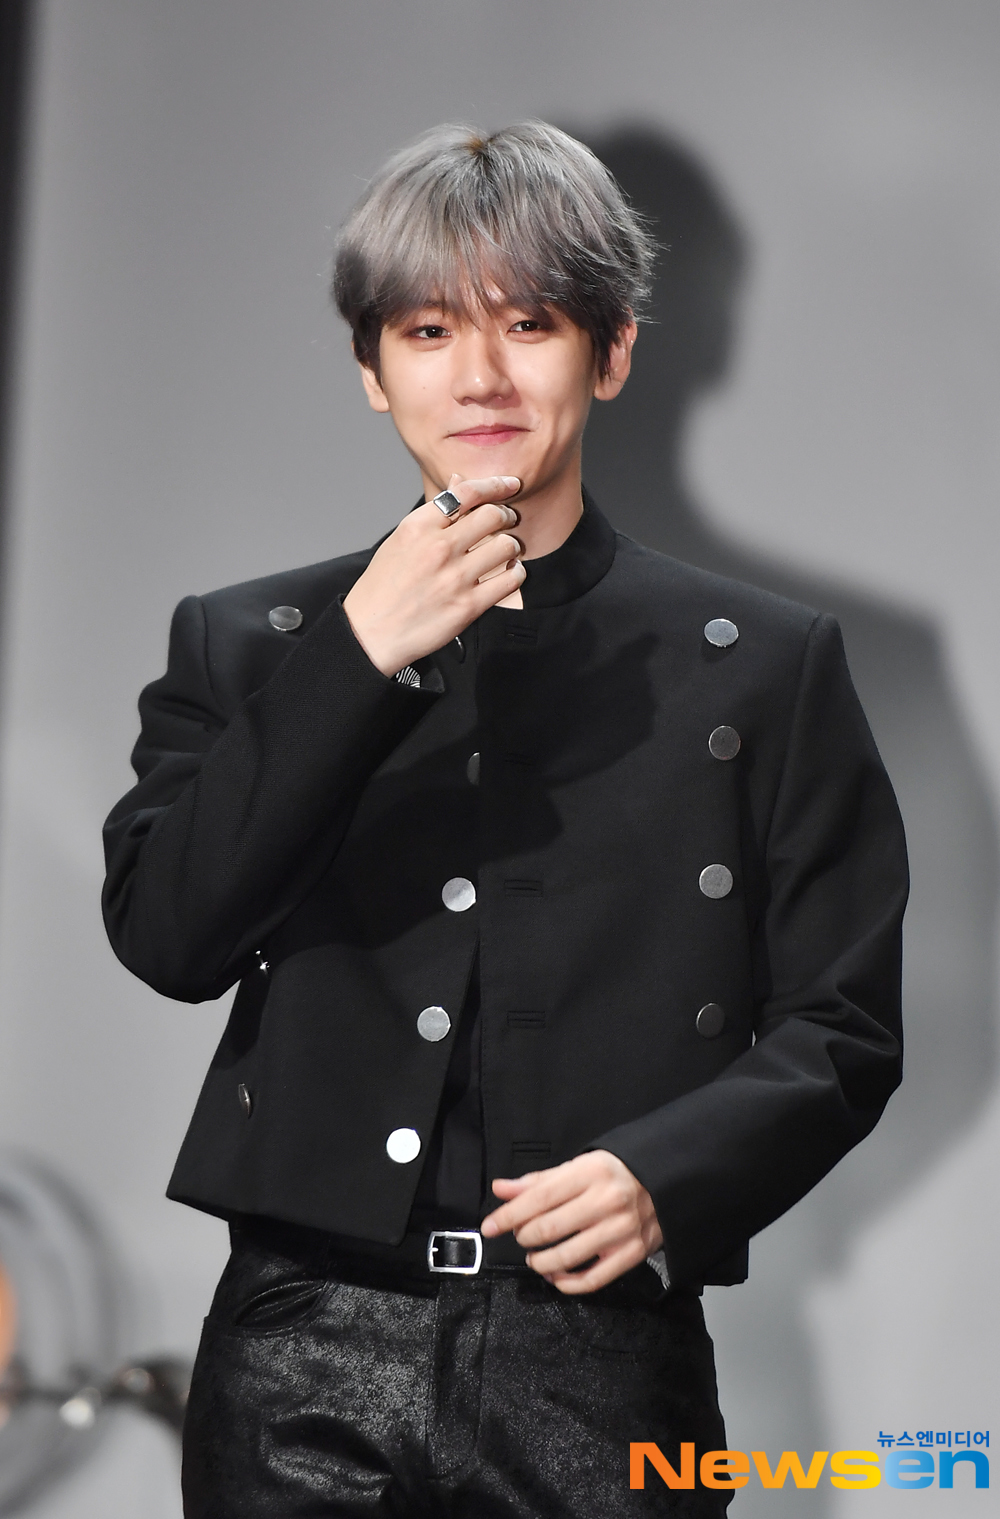 Exo Baekhyuns first solo album showcase was held at SAC Art Hall in Samsung-dong, Gangnam-gu, Seoul on July 10On this day, Baekhyun is responding to the photo pose.Baekhyuns first mini-album City Lights will be released today at 6 p.m. on various music sites, including the title song UN Village (UN Village), Stay Up (Stay Up), Betcha (Betcha), Ice Queen (Ice Queen), Diamond (Diamond),  Psycho (Psycho) is composed of six songs, and you can meet Baekhyuns outstanding vocals and sensual music worldexpressiveness